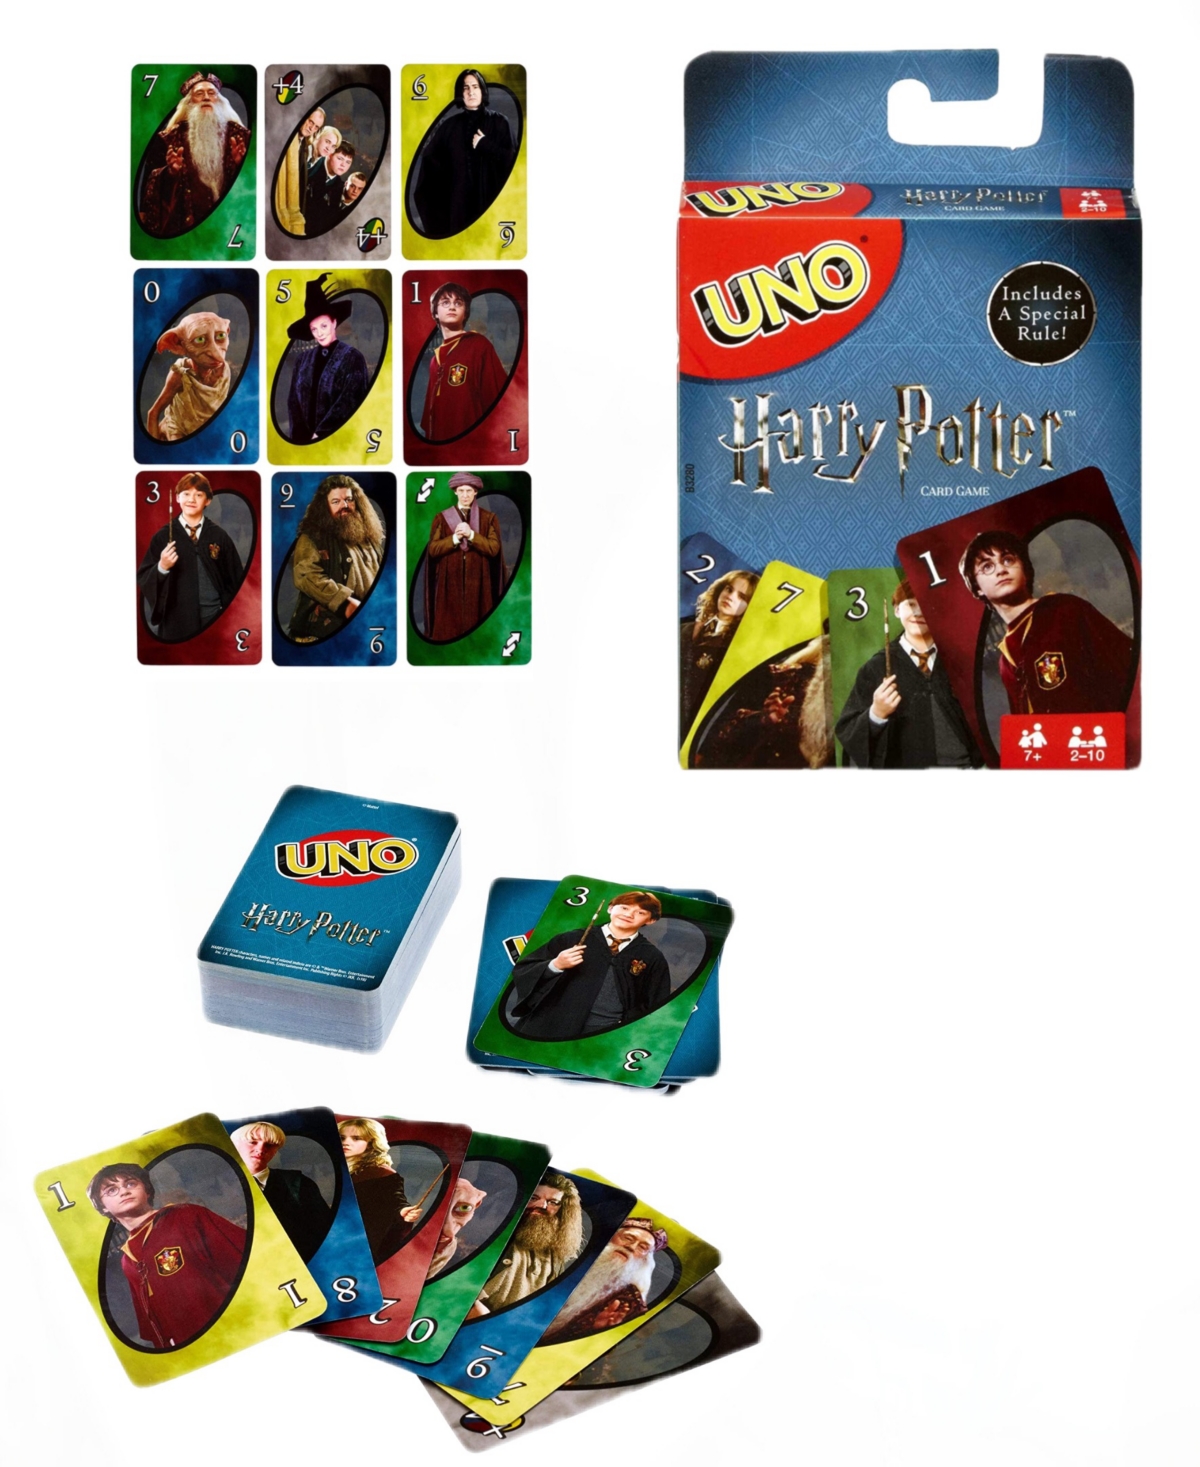 Mattel Kids' - Harry Potter Card Game In Multi Colored